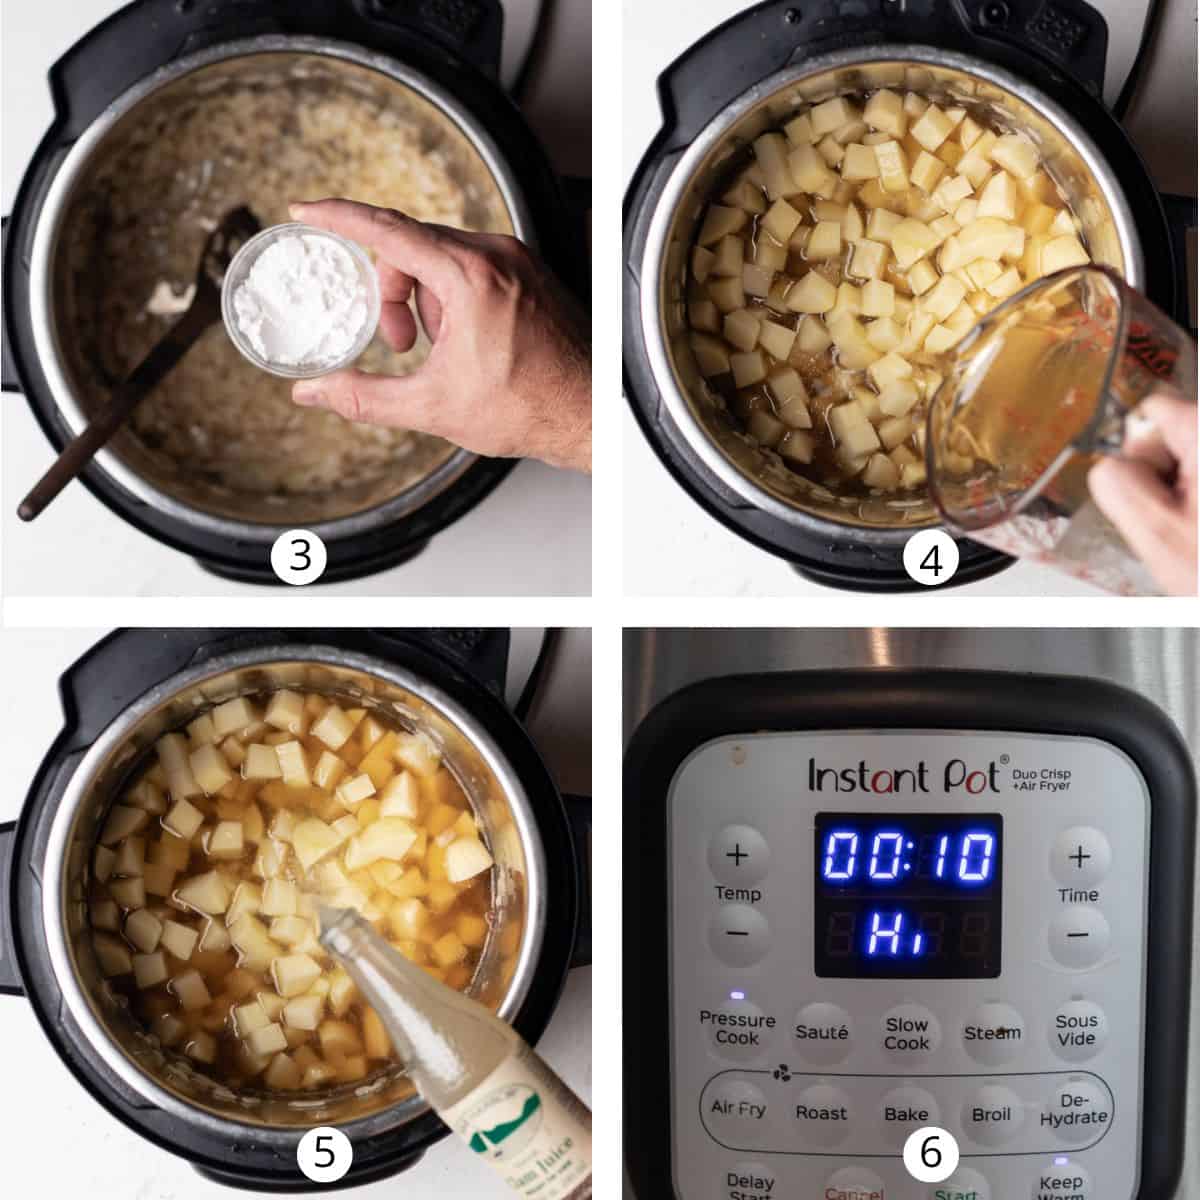 Adding arrowroot startch, chicken stock, and clam juice to the Instant Pot and setting the timer for 10 minutes.